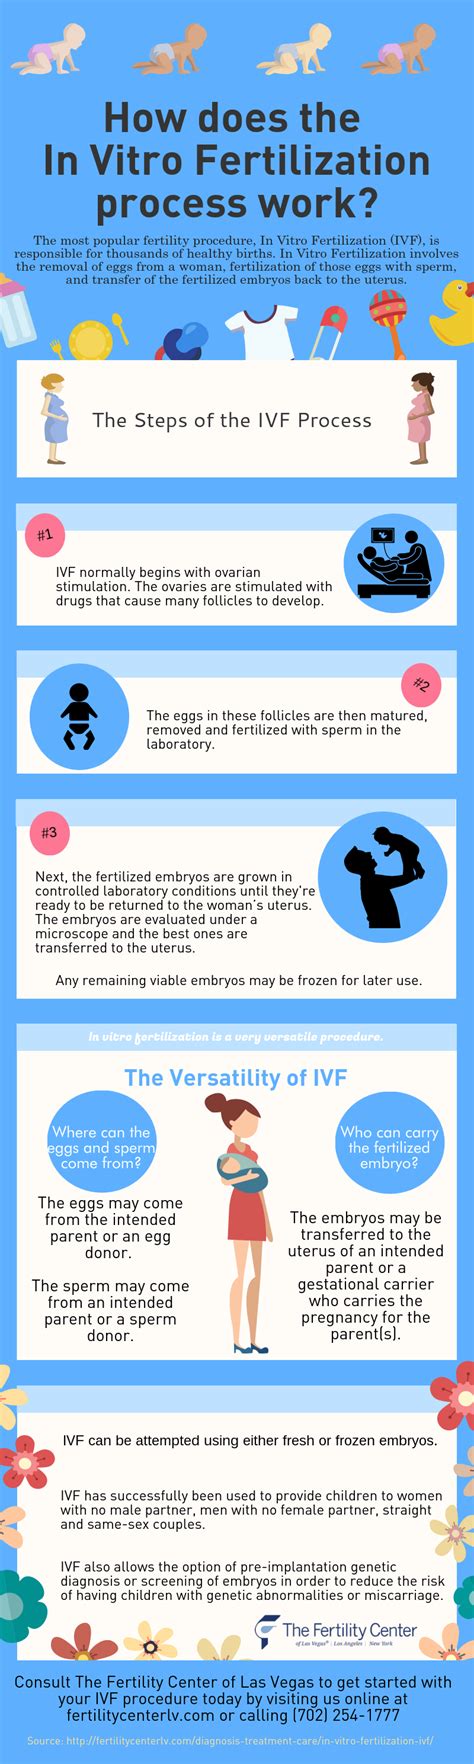 How The In Vitro Fertilization Process Works Infographic